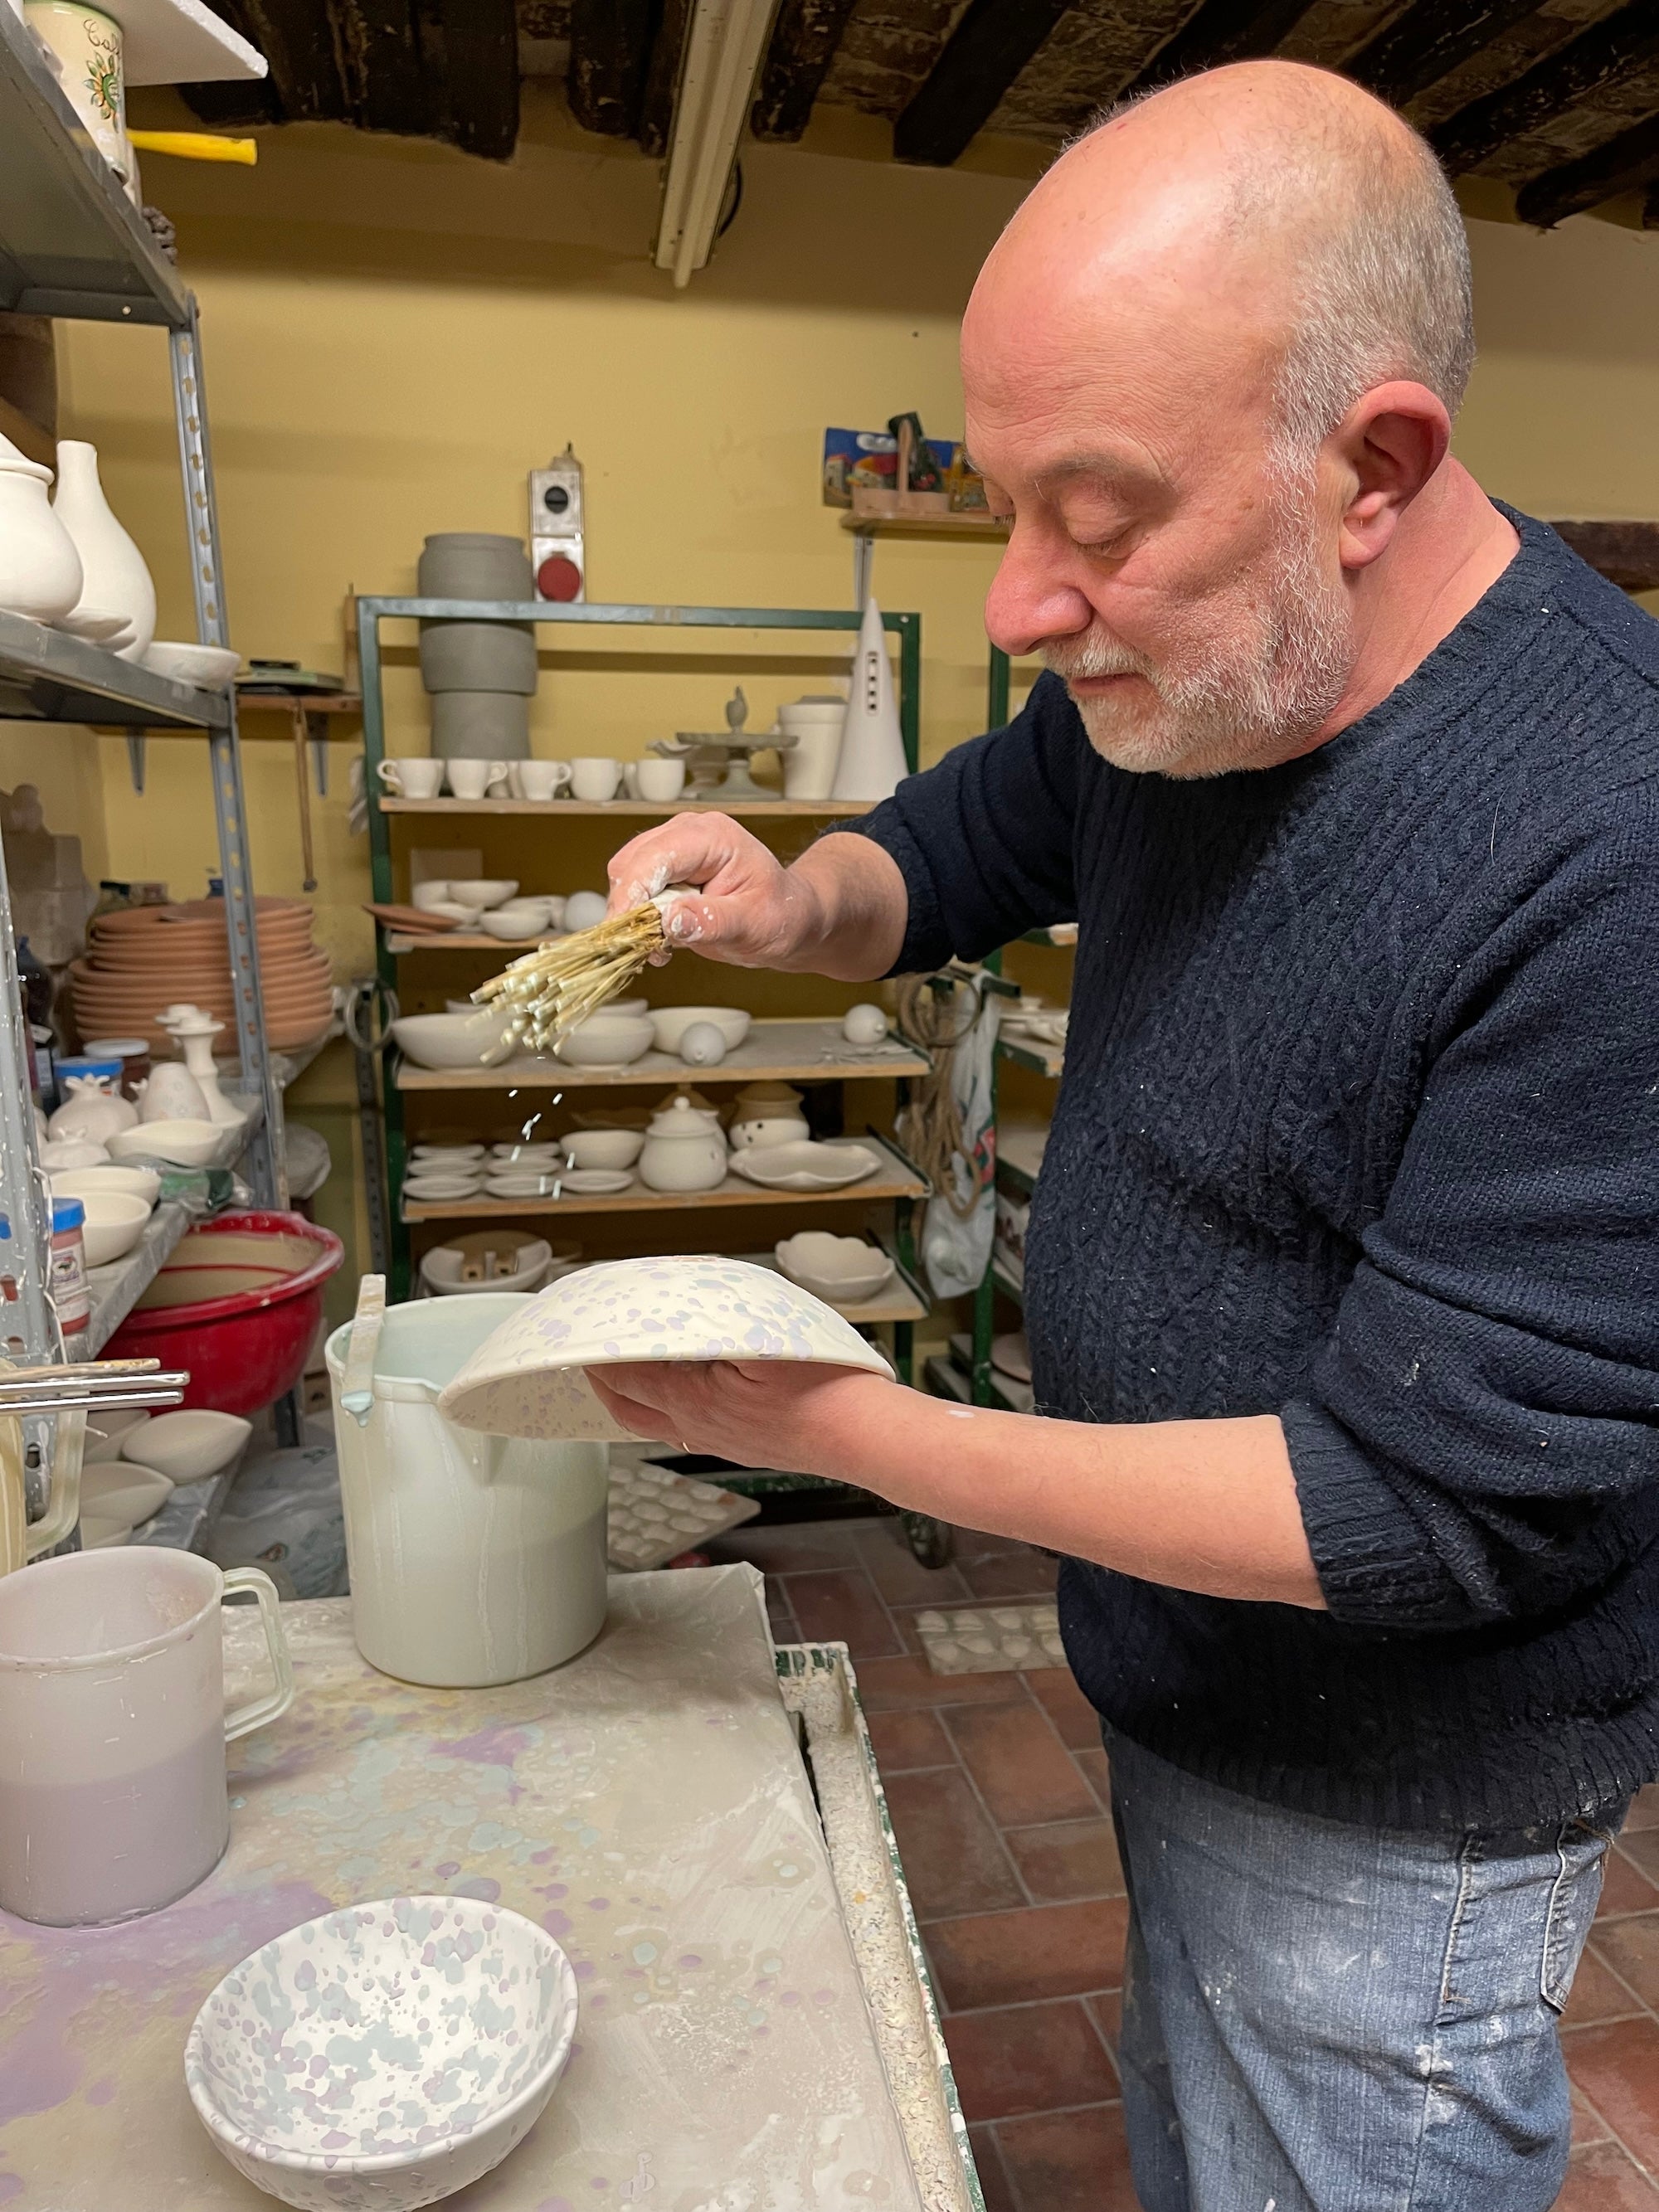 A man with a gray beard is holding a broom-like brush. The brush is dripping paint over a bowl. We can see in the background that there is some kind of pottery studio.